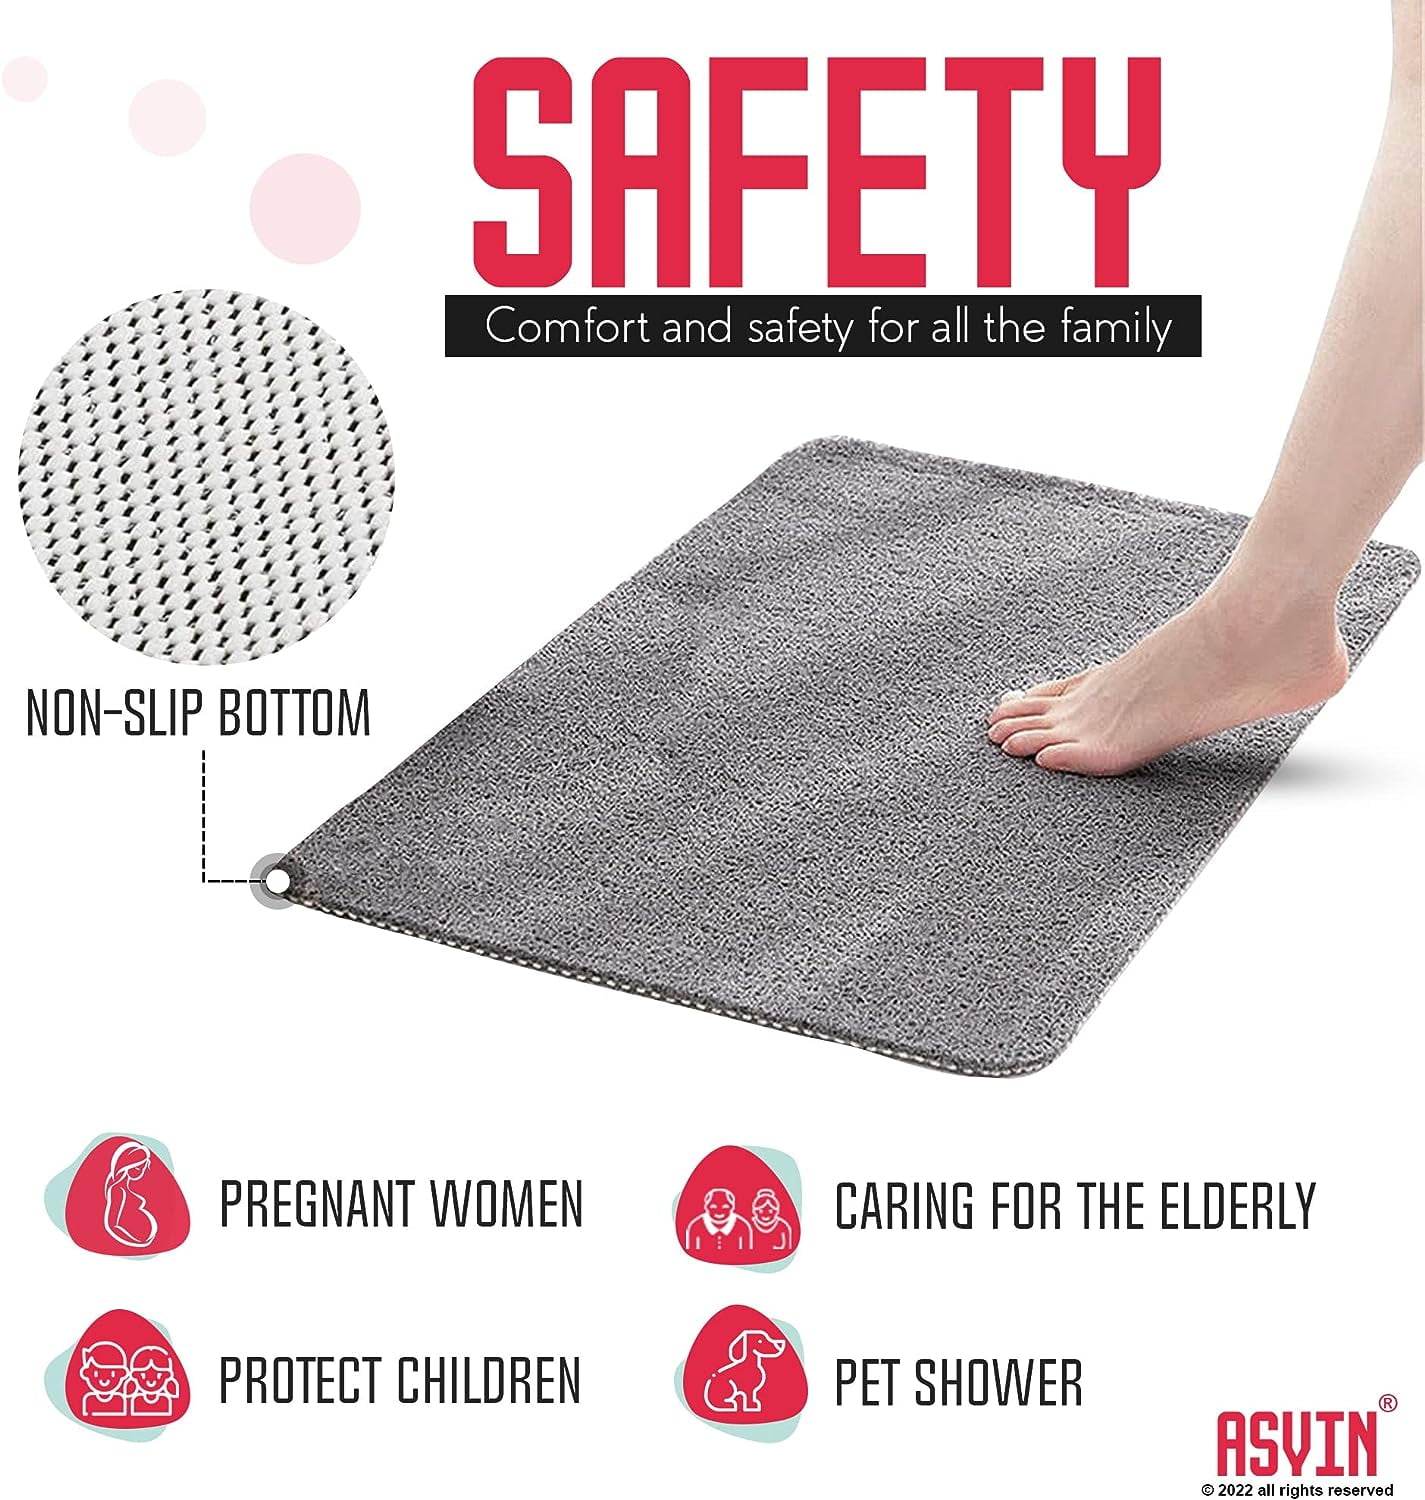  Kenney MB61186H Microban Protected 26.75 L x 14.5 W Vinyl  Bubble Bath Mat, Shower Mat, Tub Mat with Suction Cups and Drain Holes for  Use Inside the Shower, White : Home